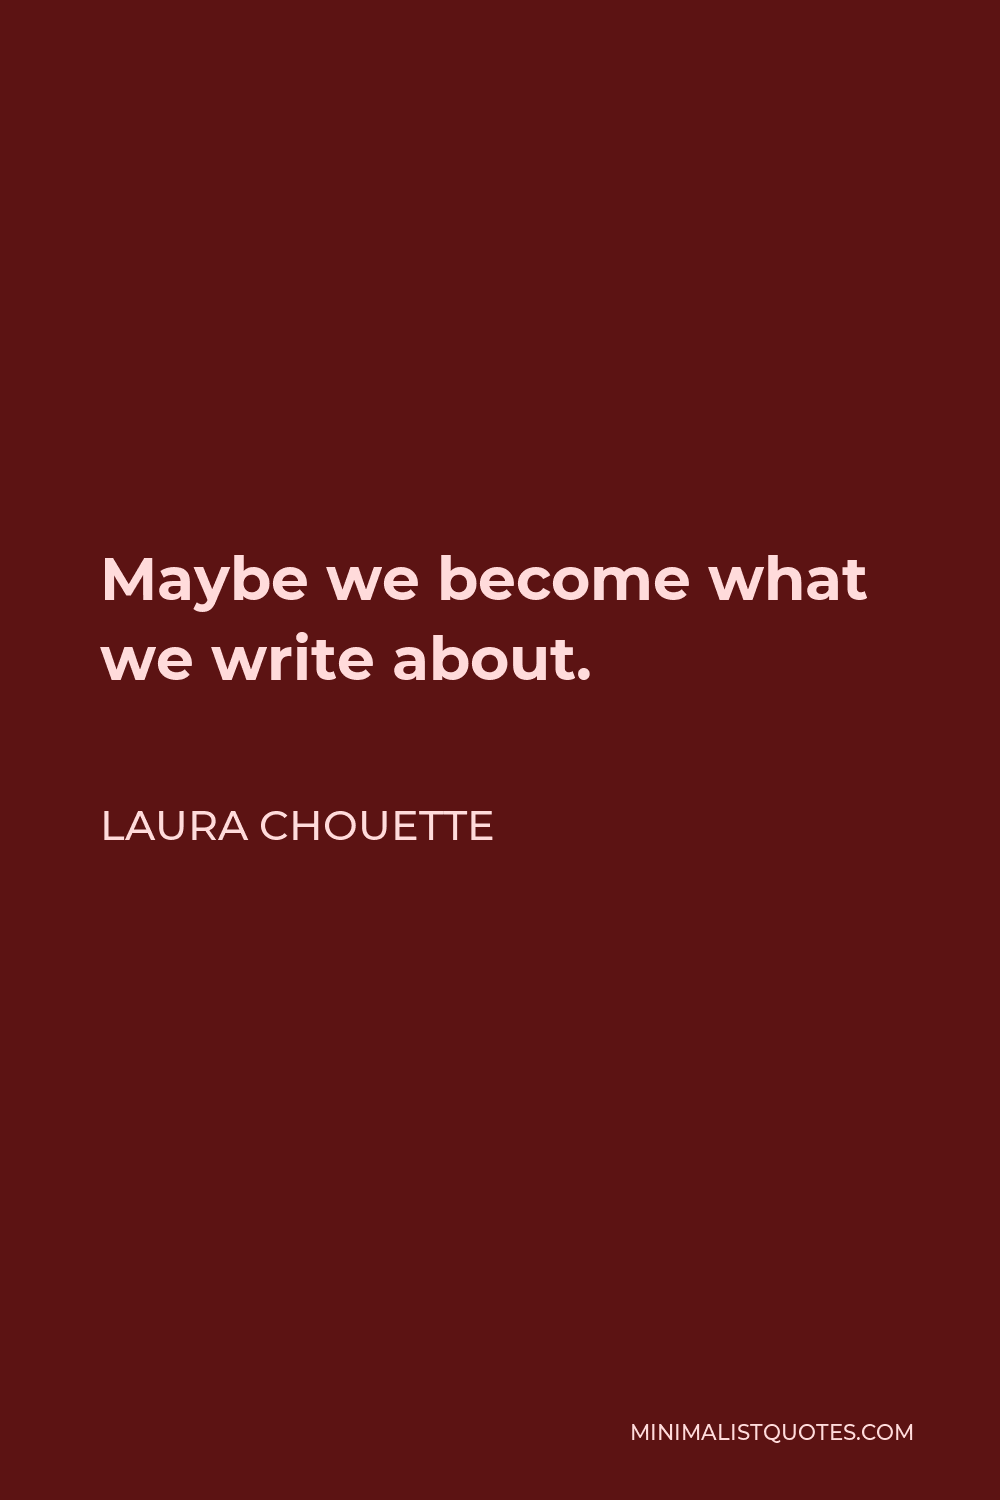 Laura Chouette Quote - Maybe we become what we write about.